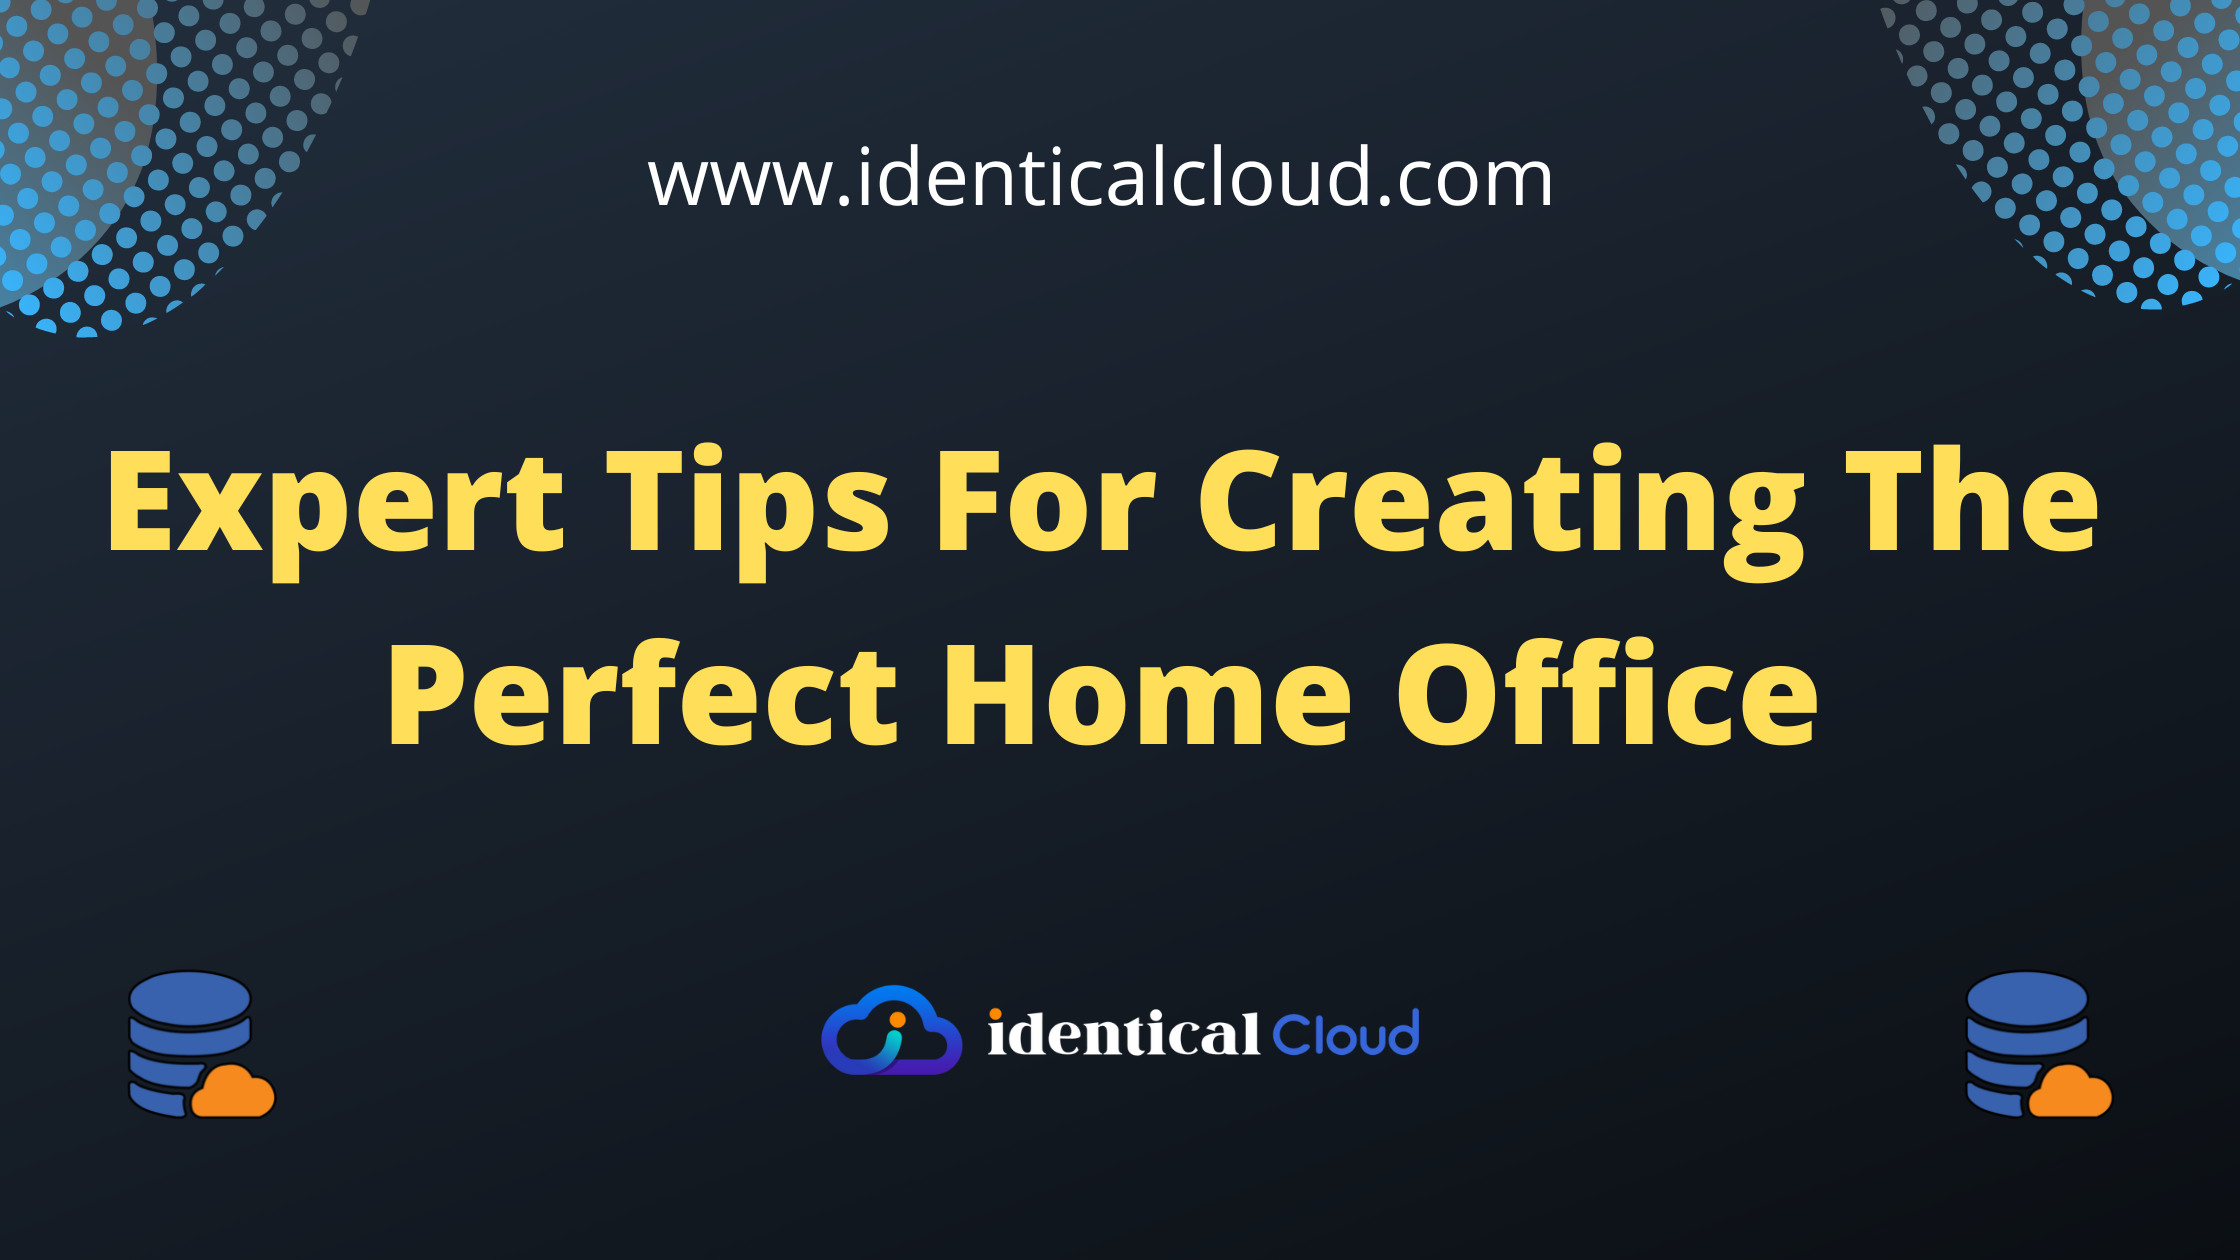 Expert Tips For Creating The Perfect Home Office - identicalcloud.com